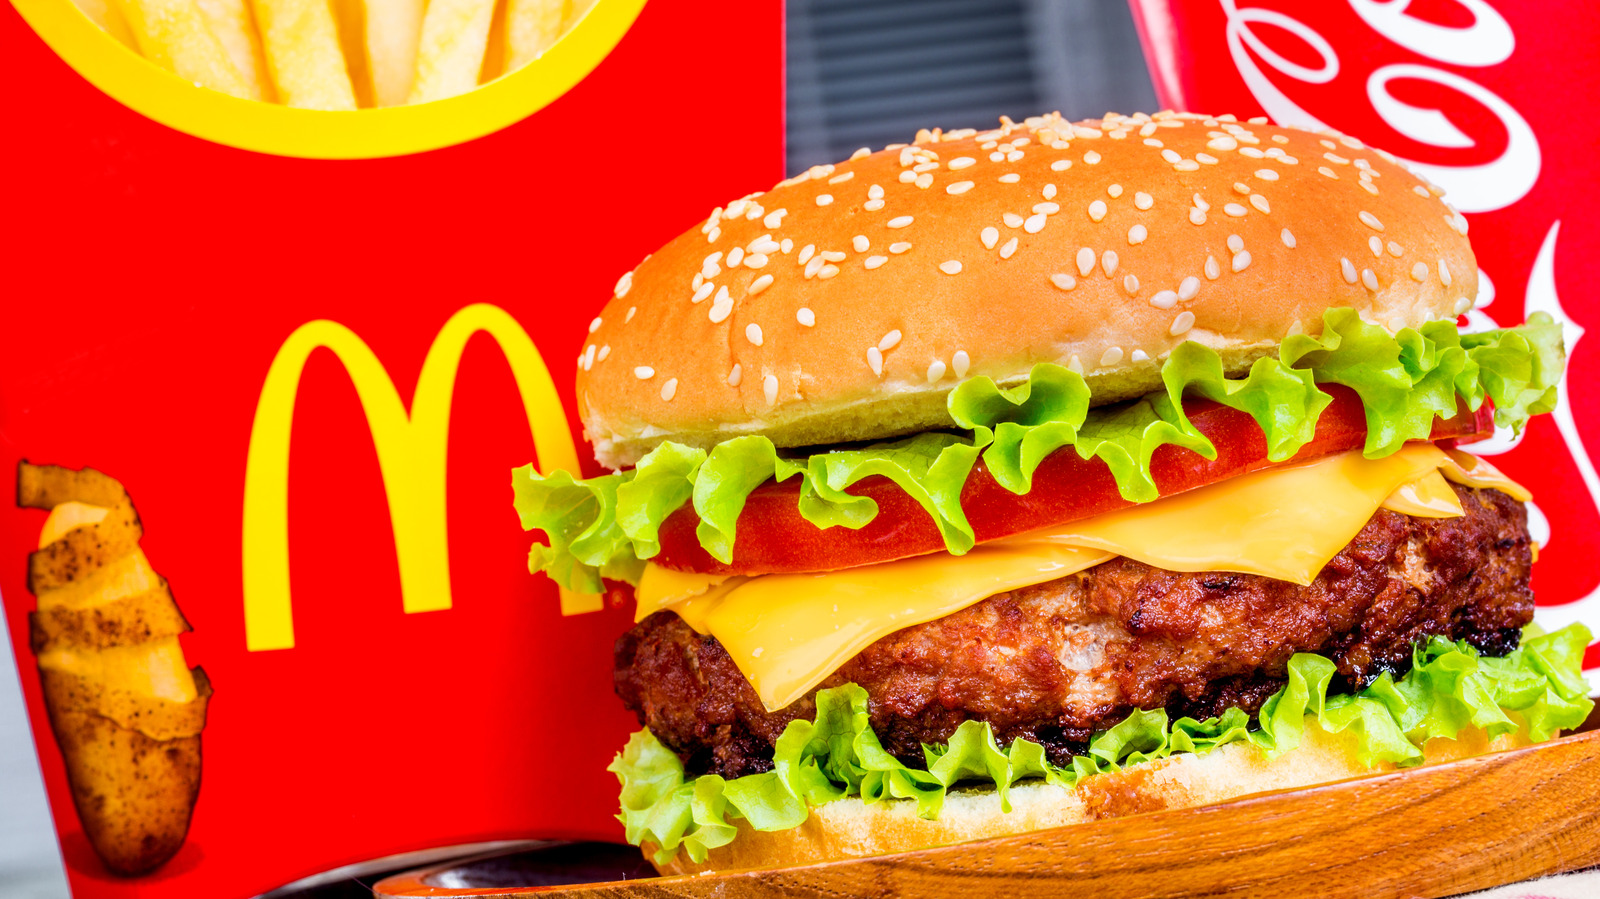 Tomatoes Are Officially Off The Menu At McDonald’s In India. Here’s Why – The Daily Meal